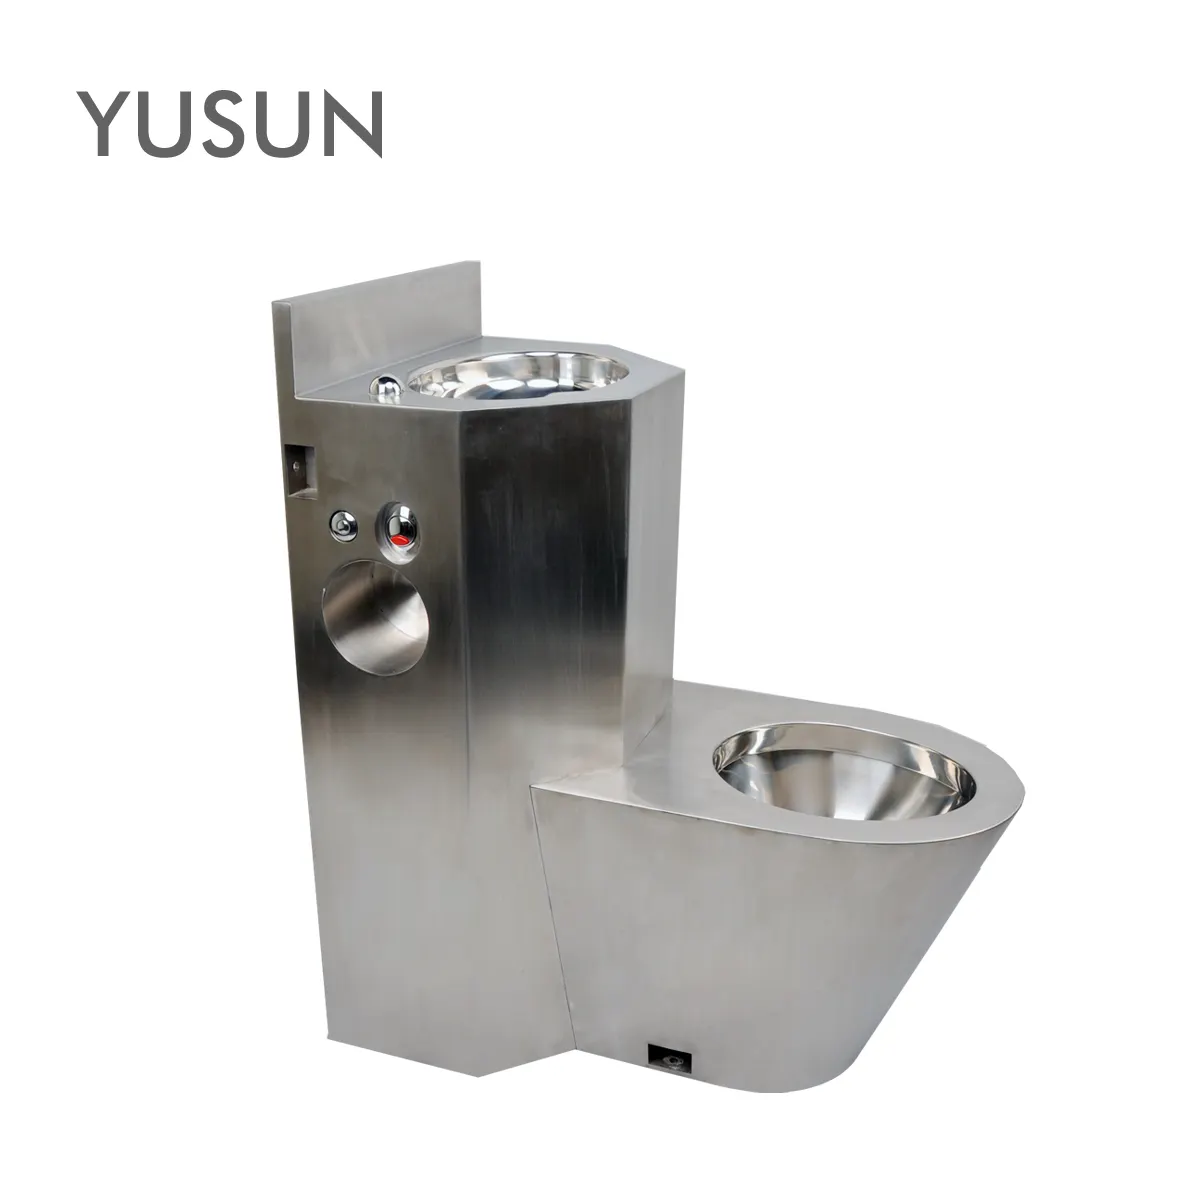 One Piece Stainless Steel Prison Combination Toilet